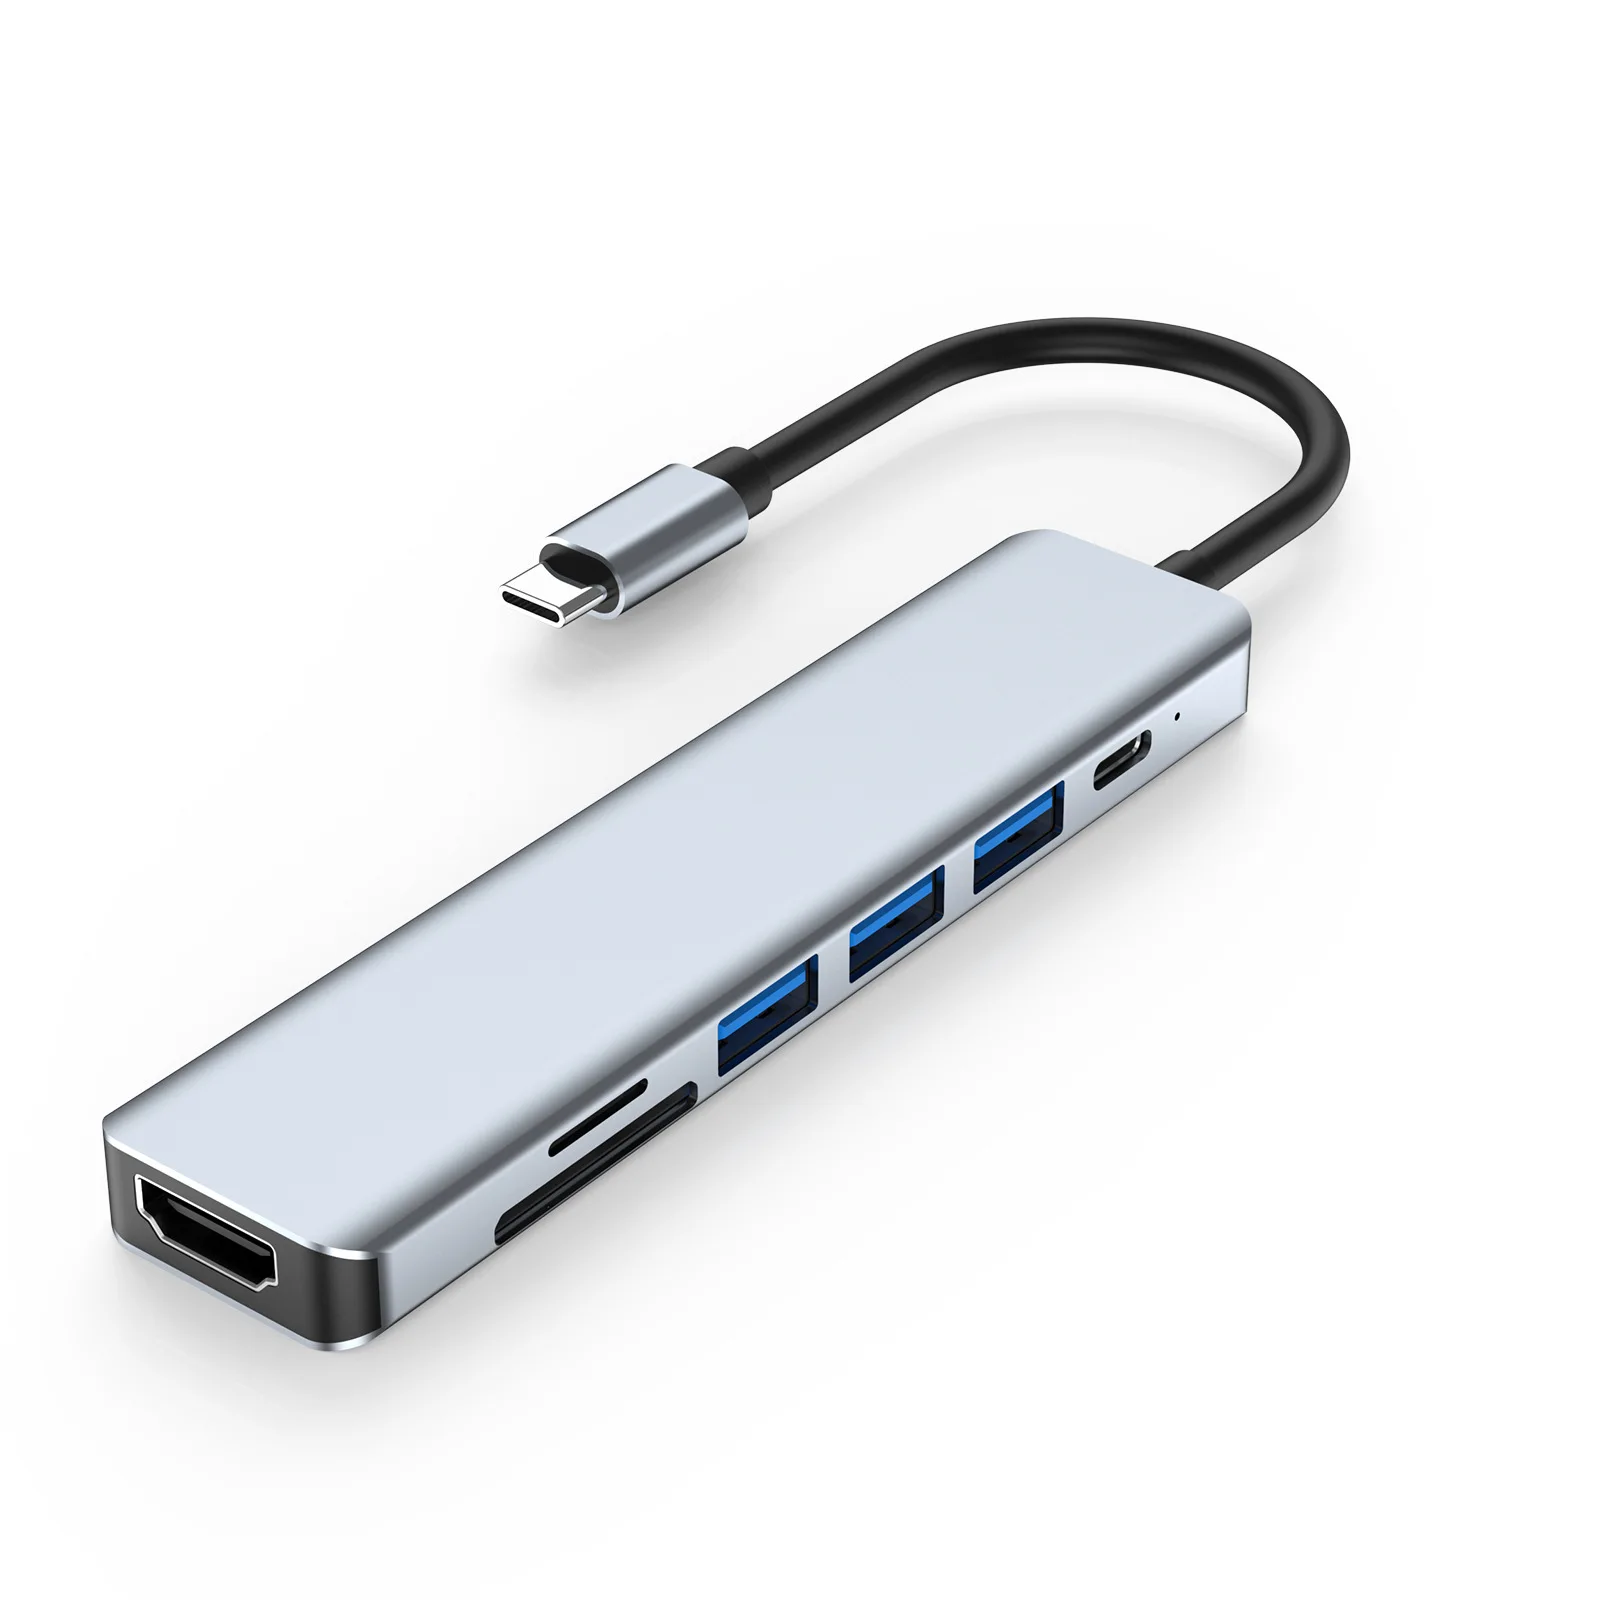 

New style 3.0 5Gbps 4 Ports USB3.0 Splitter Adapter Super Speed High Quality Computer Peripherals White/Black USB HUB